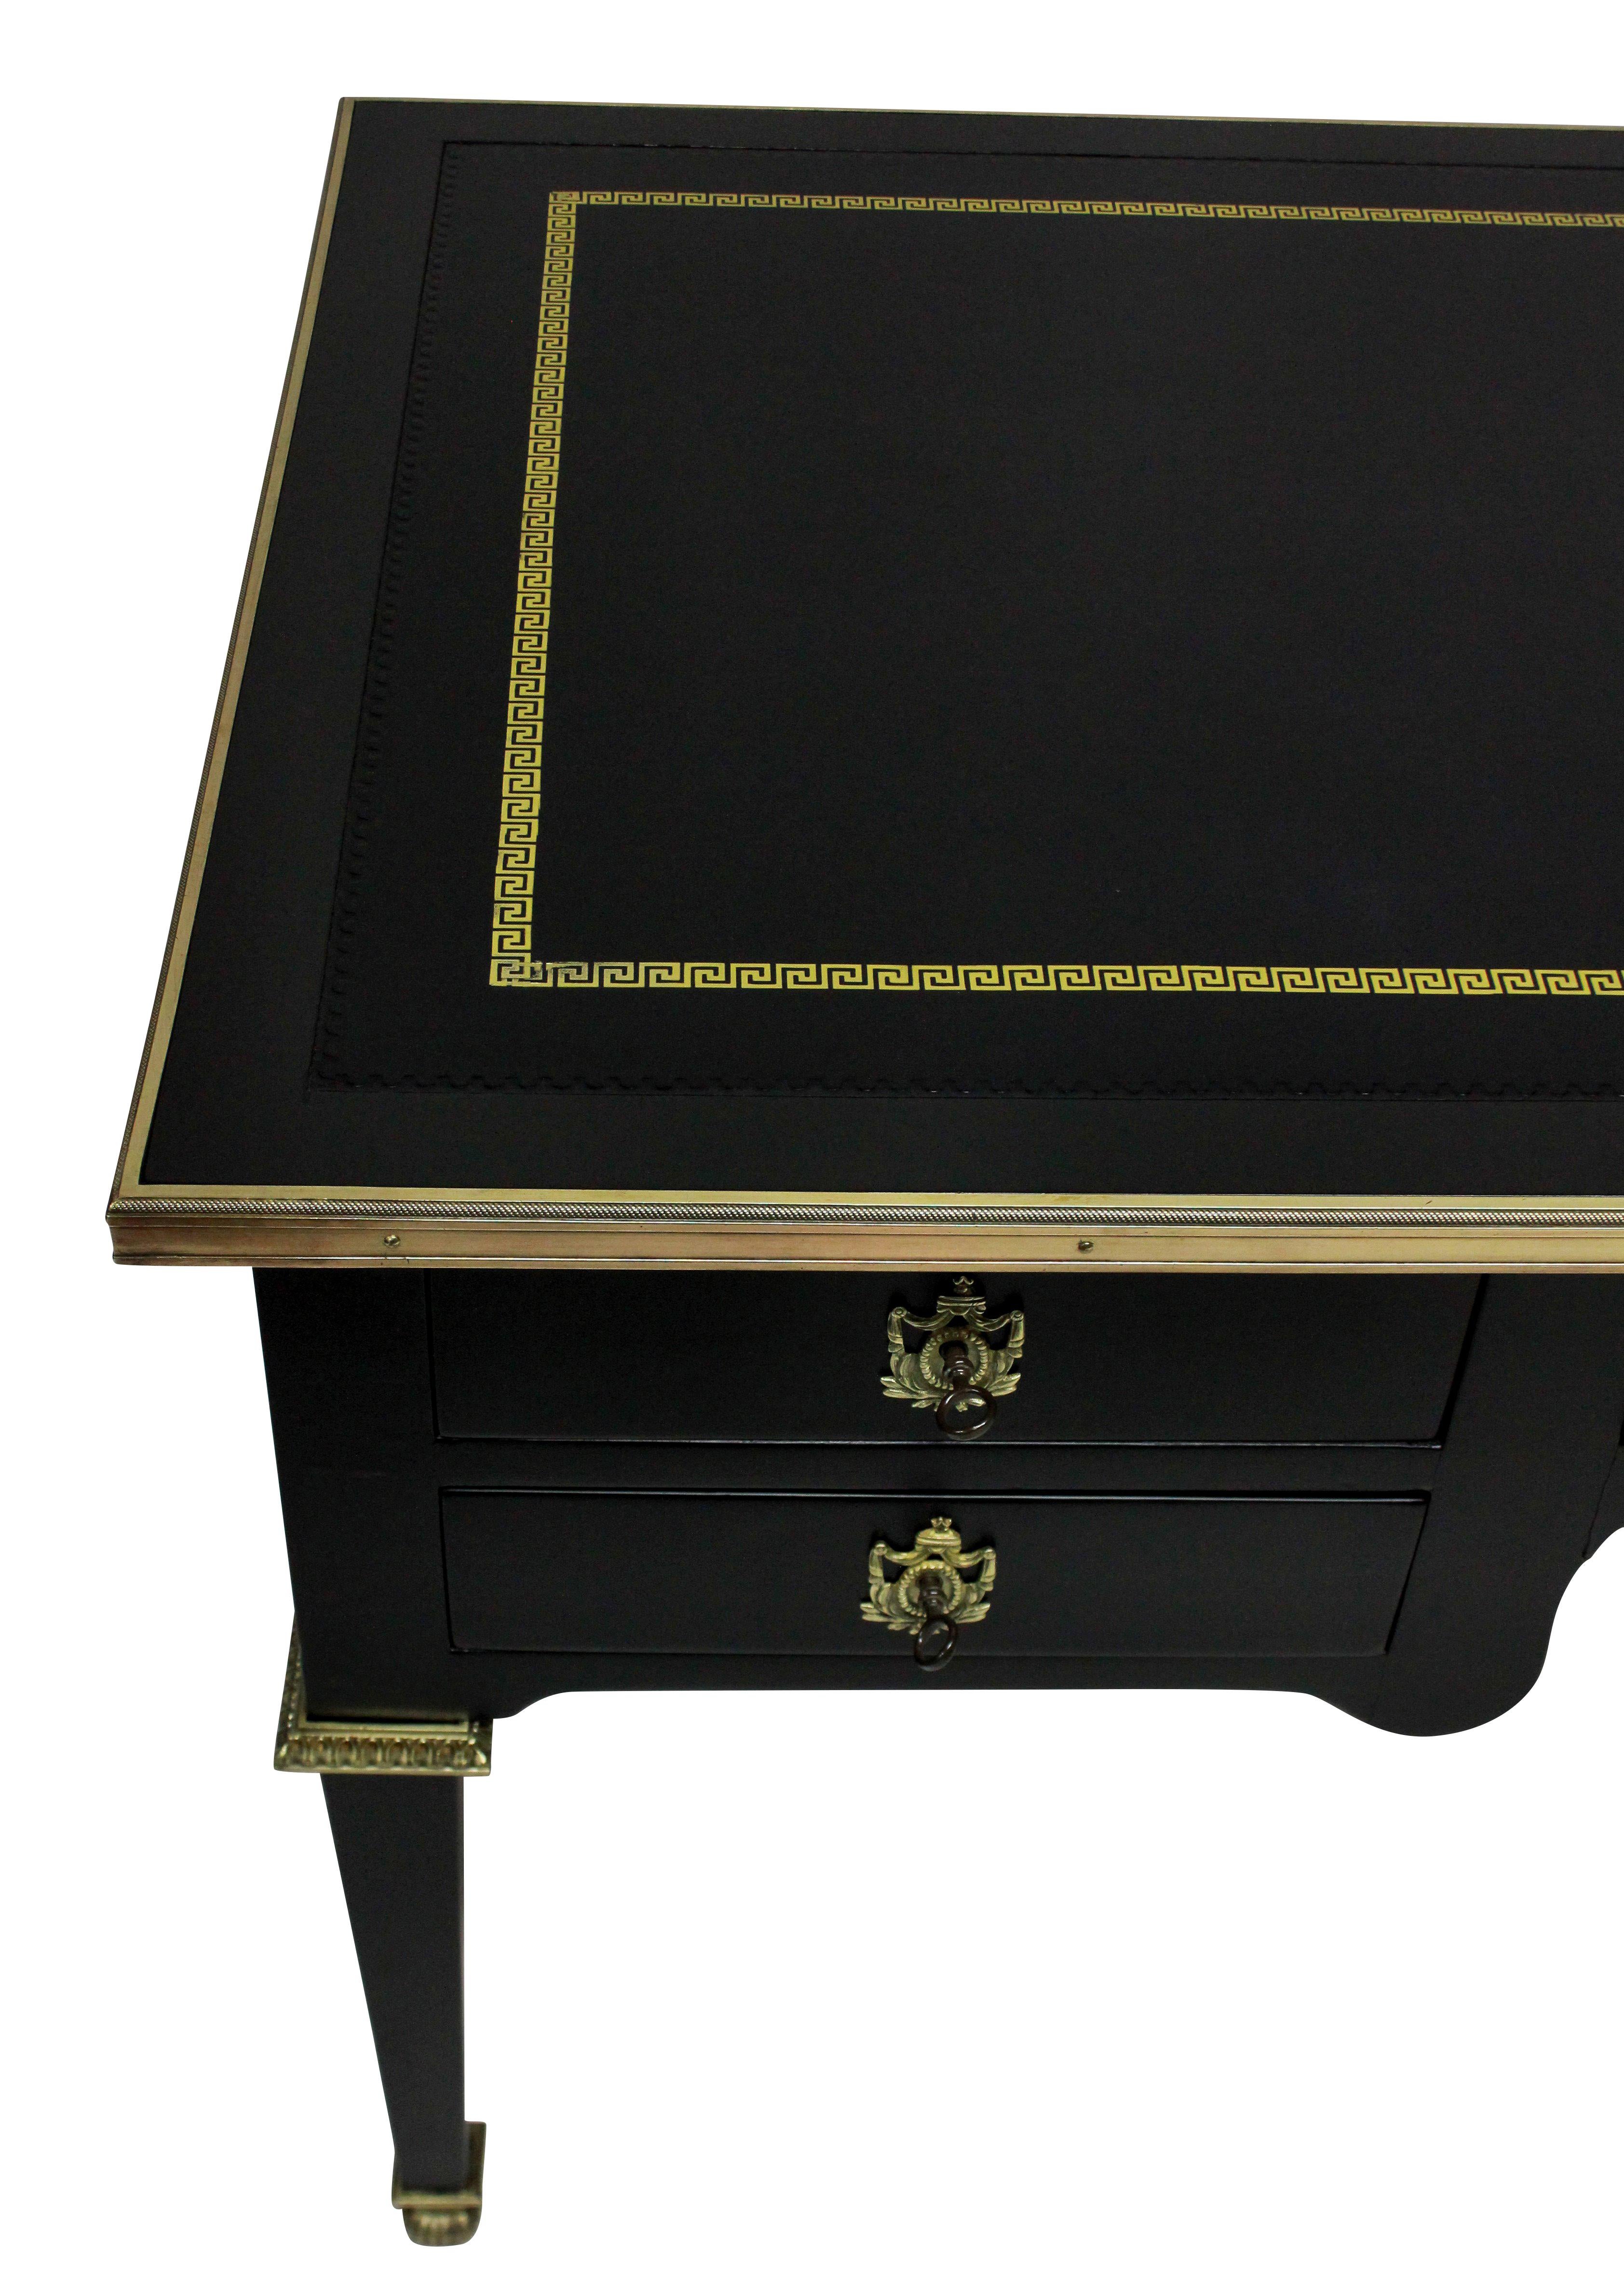 A fine French Louis XVI style desk in ebonized walnut, with a leather top with Greek key border. The gilt bronze mounts and escutcheons of good quality and each drawer has a separate key.

 Measures: 57 cm high knee hole.